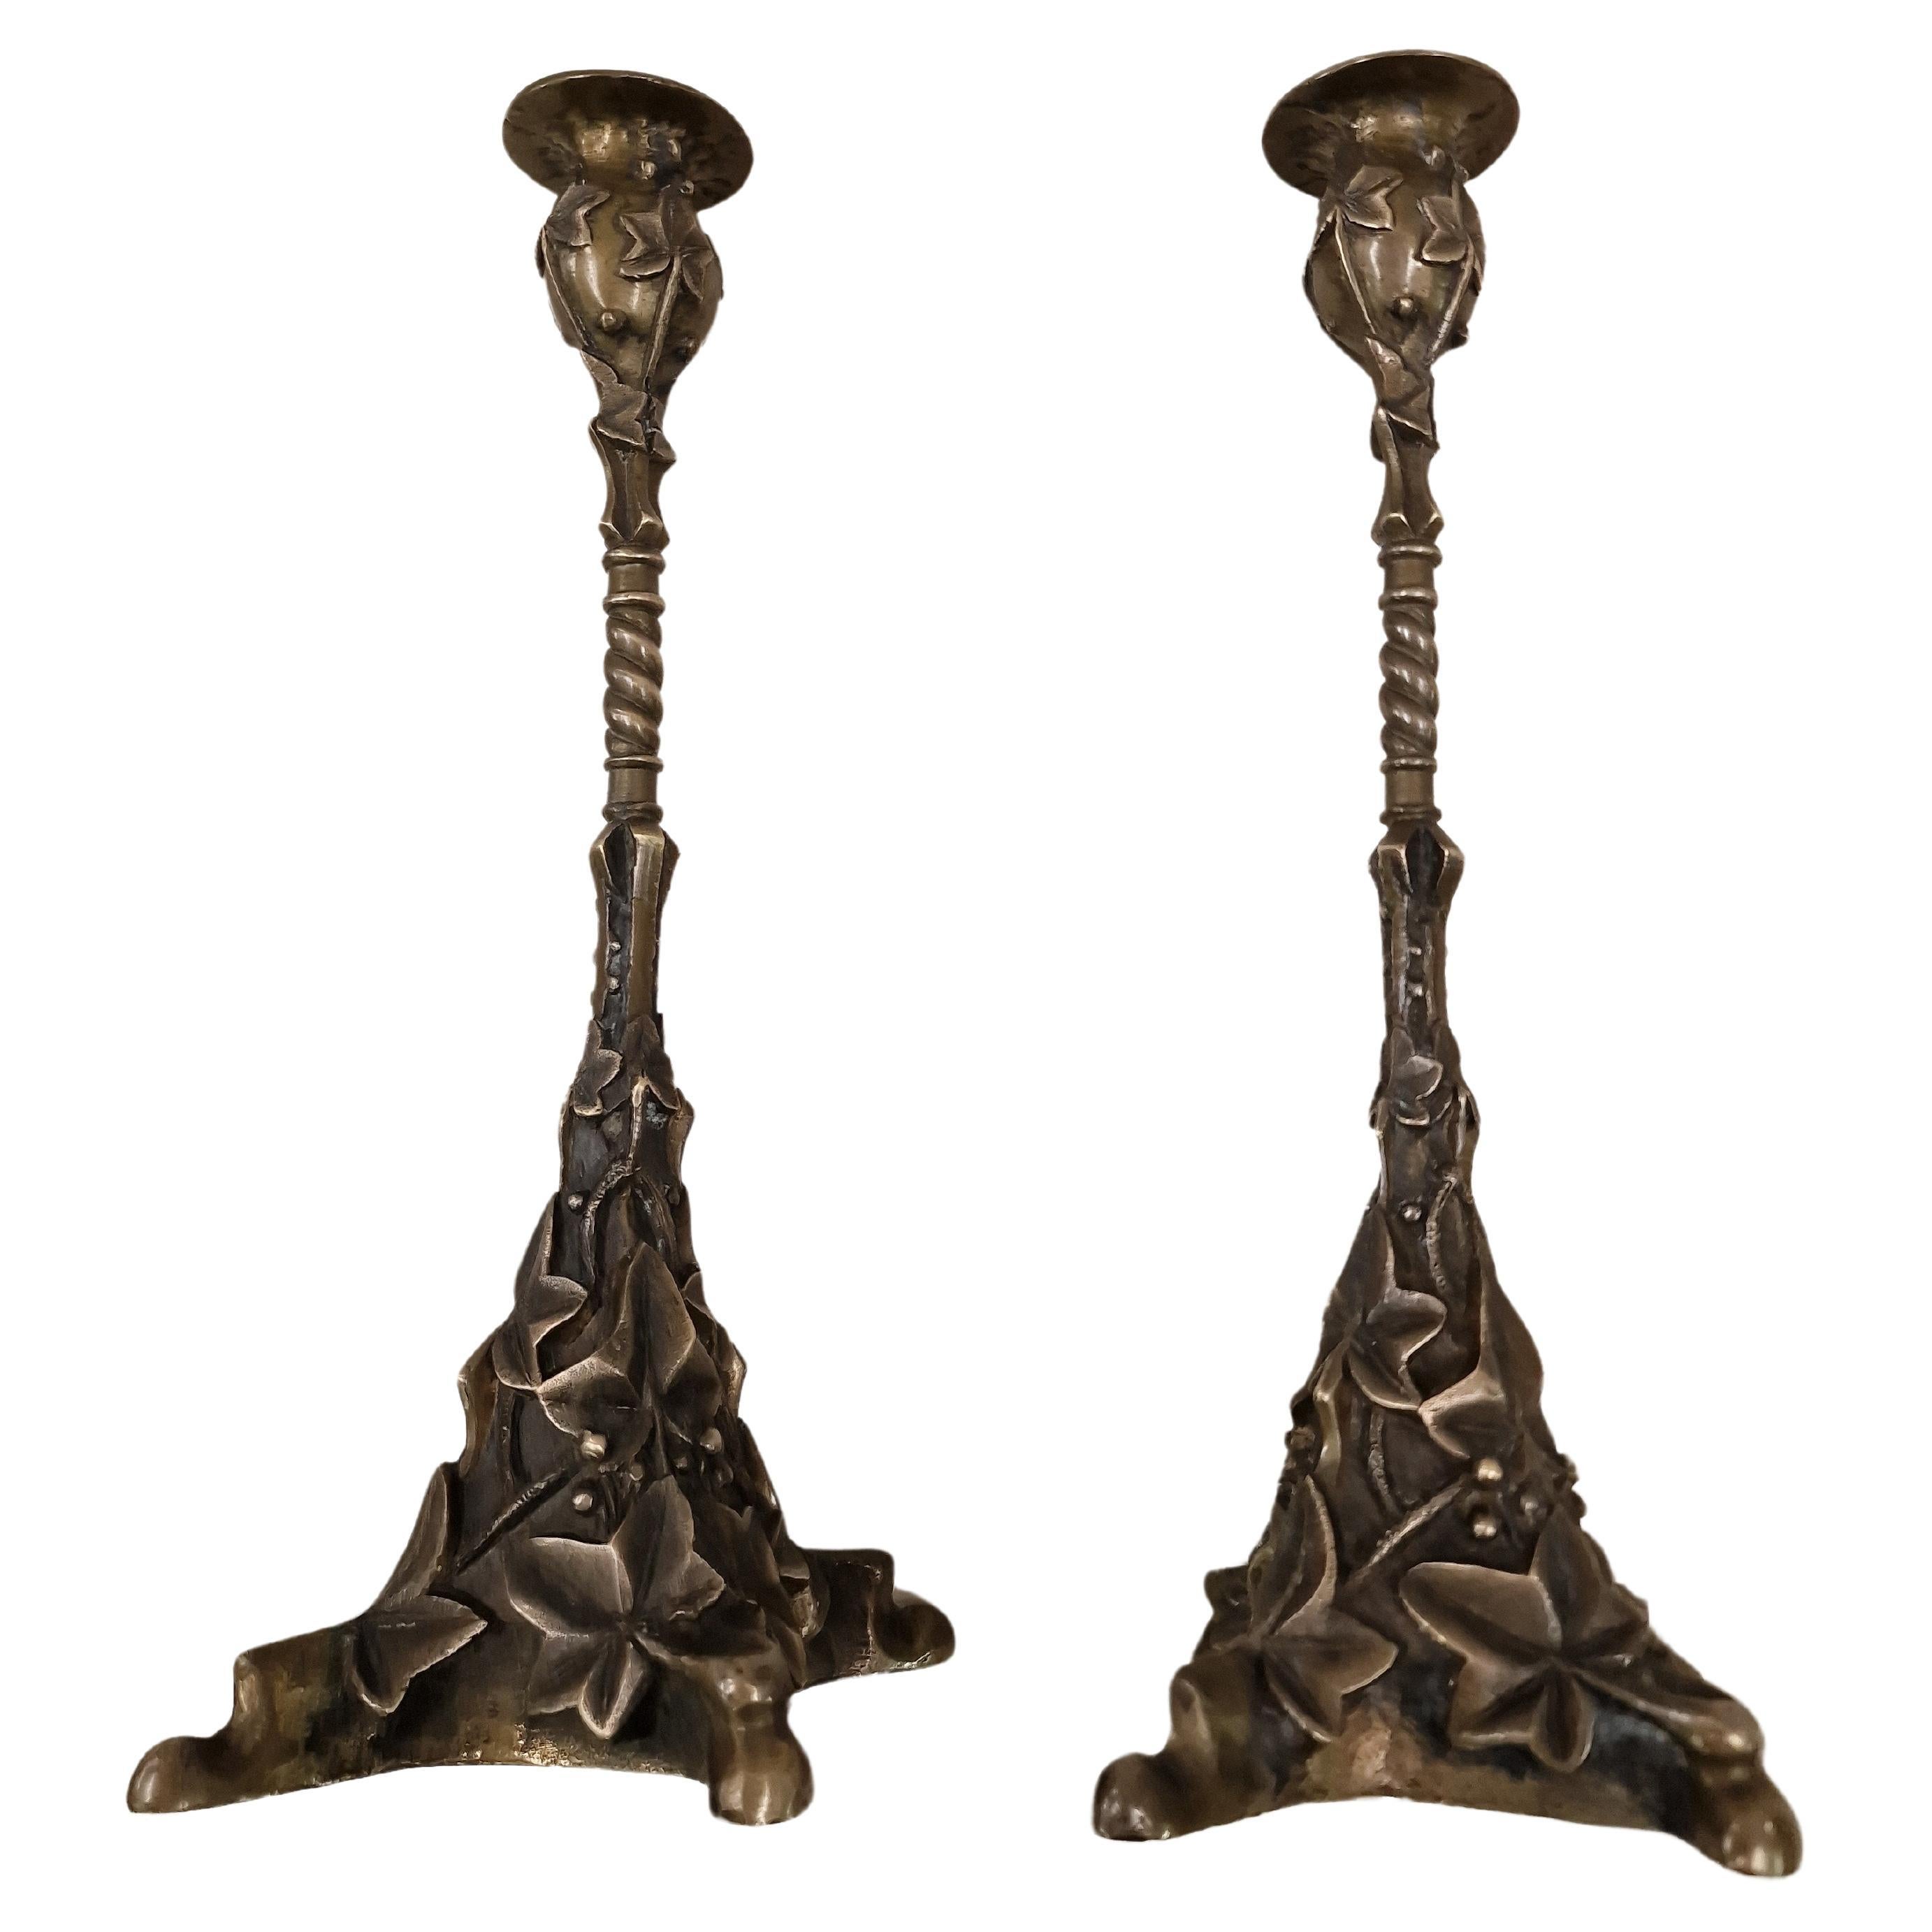 Very nice pair of candlesticks richly decorated in solid bronze from around 1890. This is an impressive piece of craftsmanship, the detailed decor and the heavy quality show the speciality.

The irregular base with two short and two long legs is